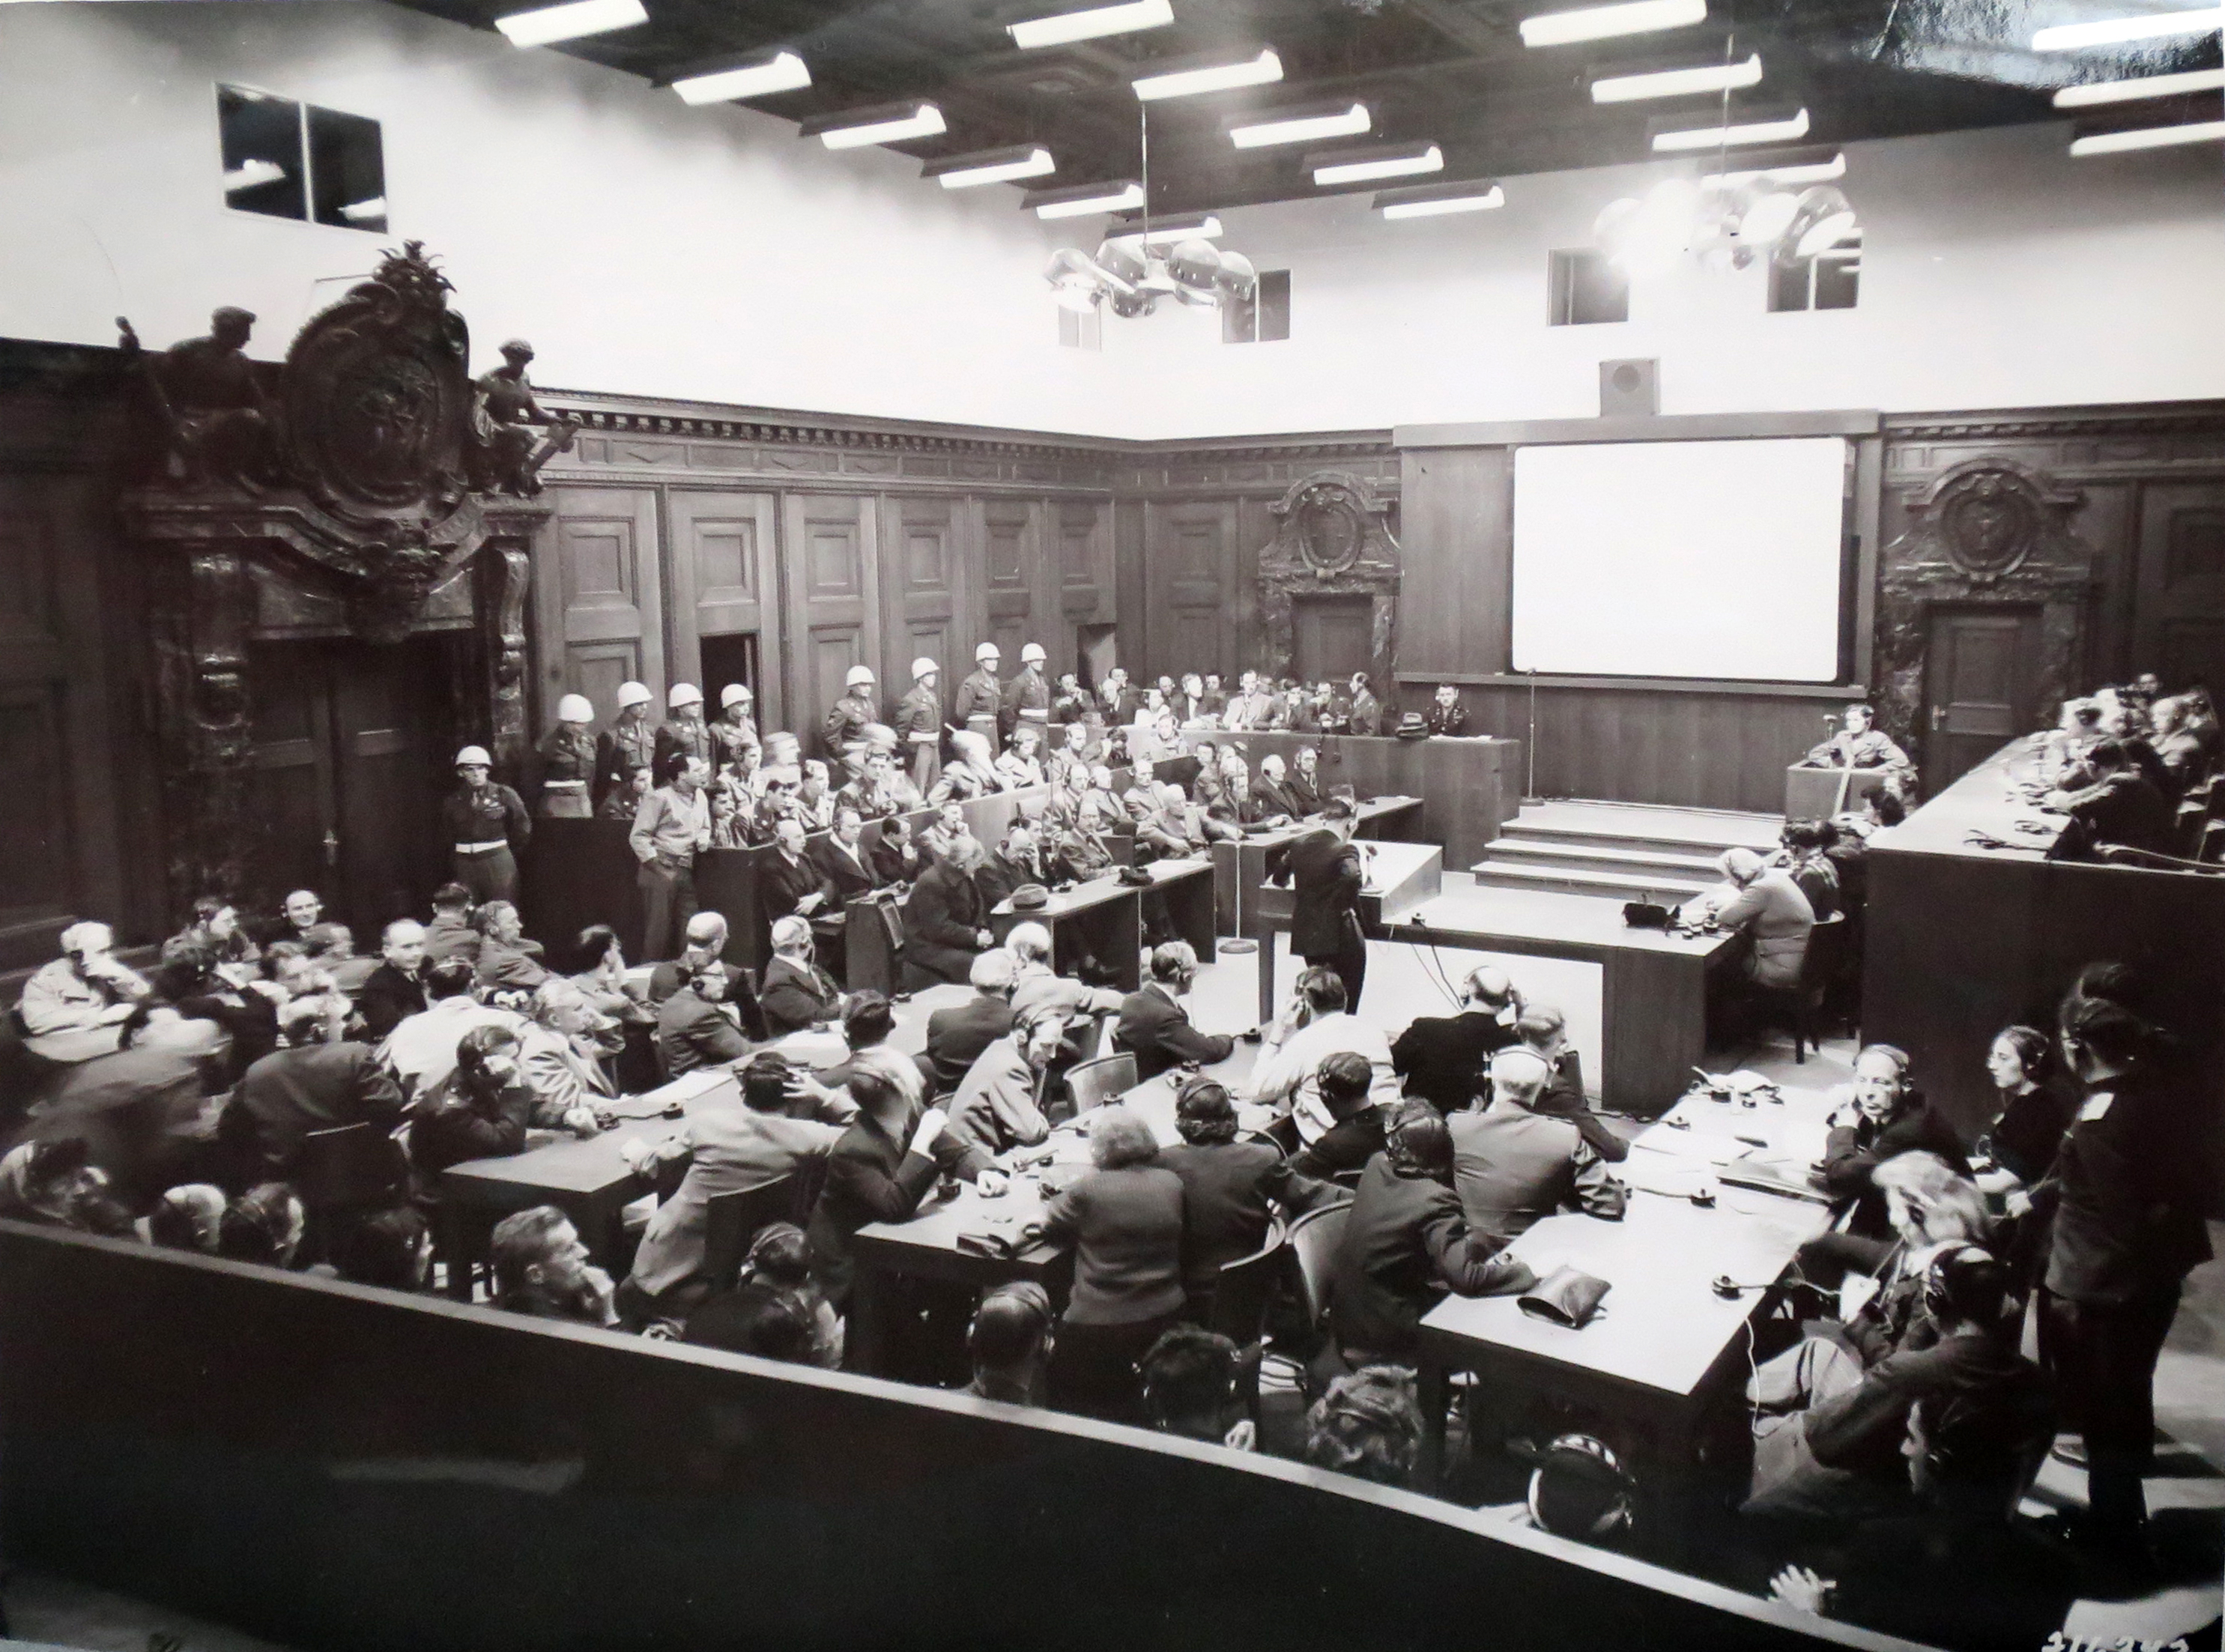 [Building the Case: Design and Media at the International Military Tribunal, c. 1945] 